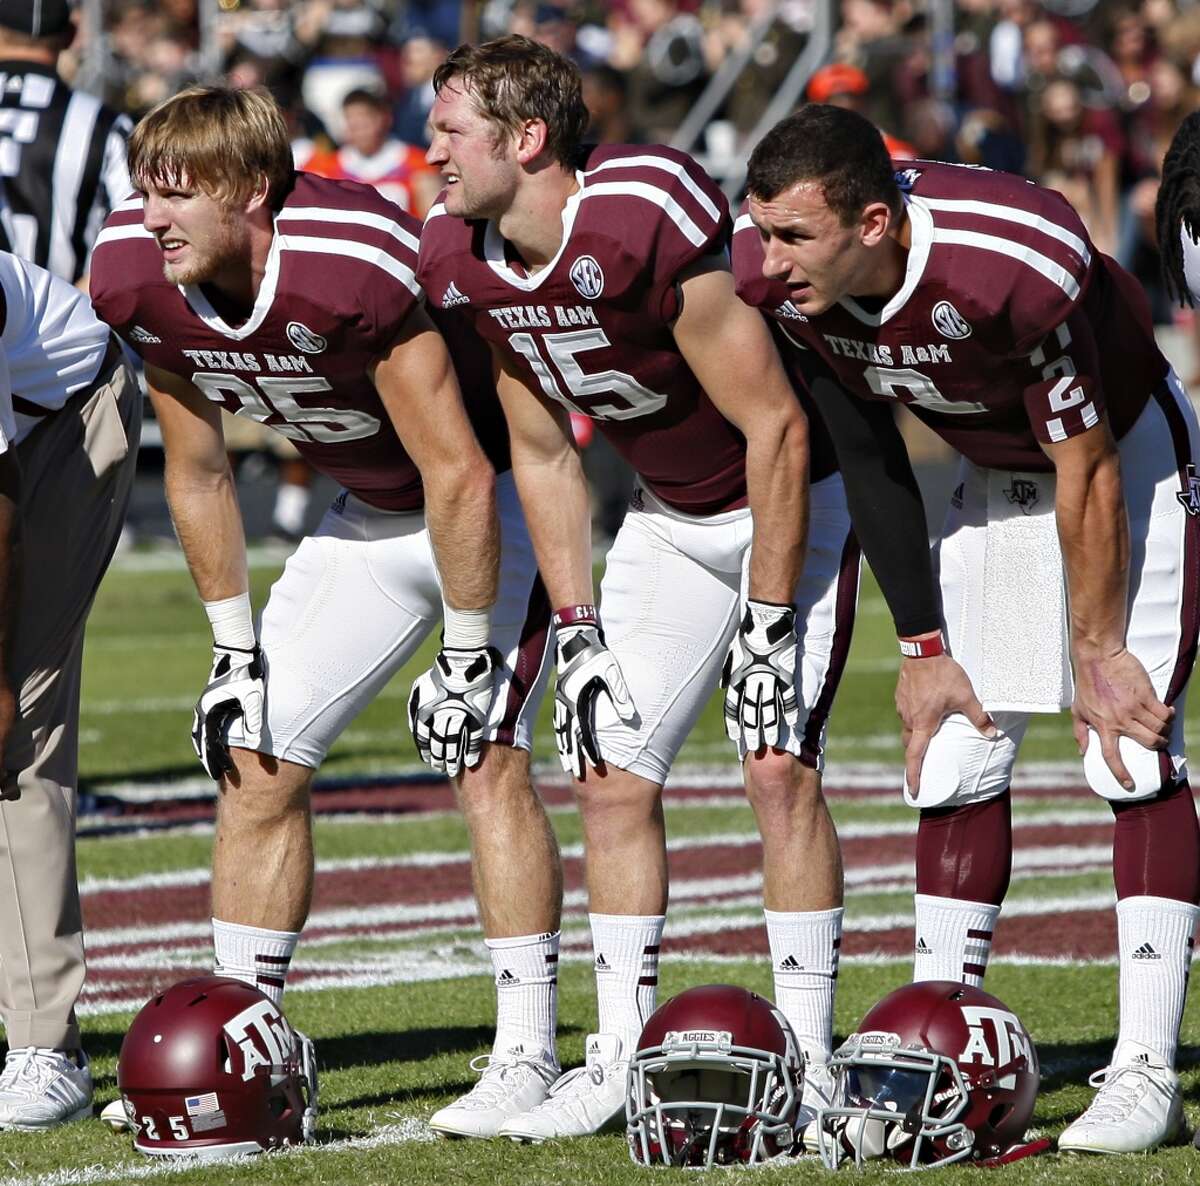 Ryan Swope #25 of the Texas A&M Aggies,Travis Labhart #15 of the Texas A&M Aggies and Johnny Manziel #2 of the Texas A&M Aggies at Kyle Field on November 17, 2012 in College Station, Texas. (Bob Levey / Getty Images)